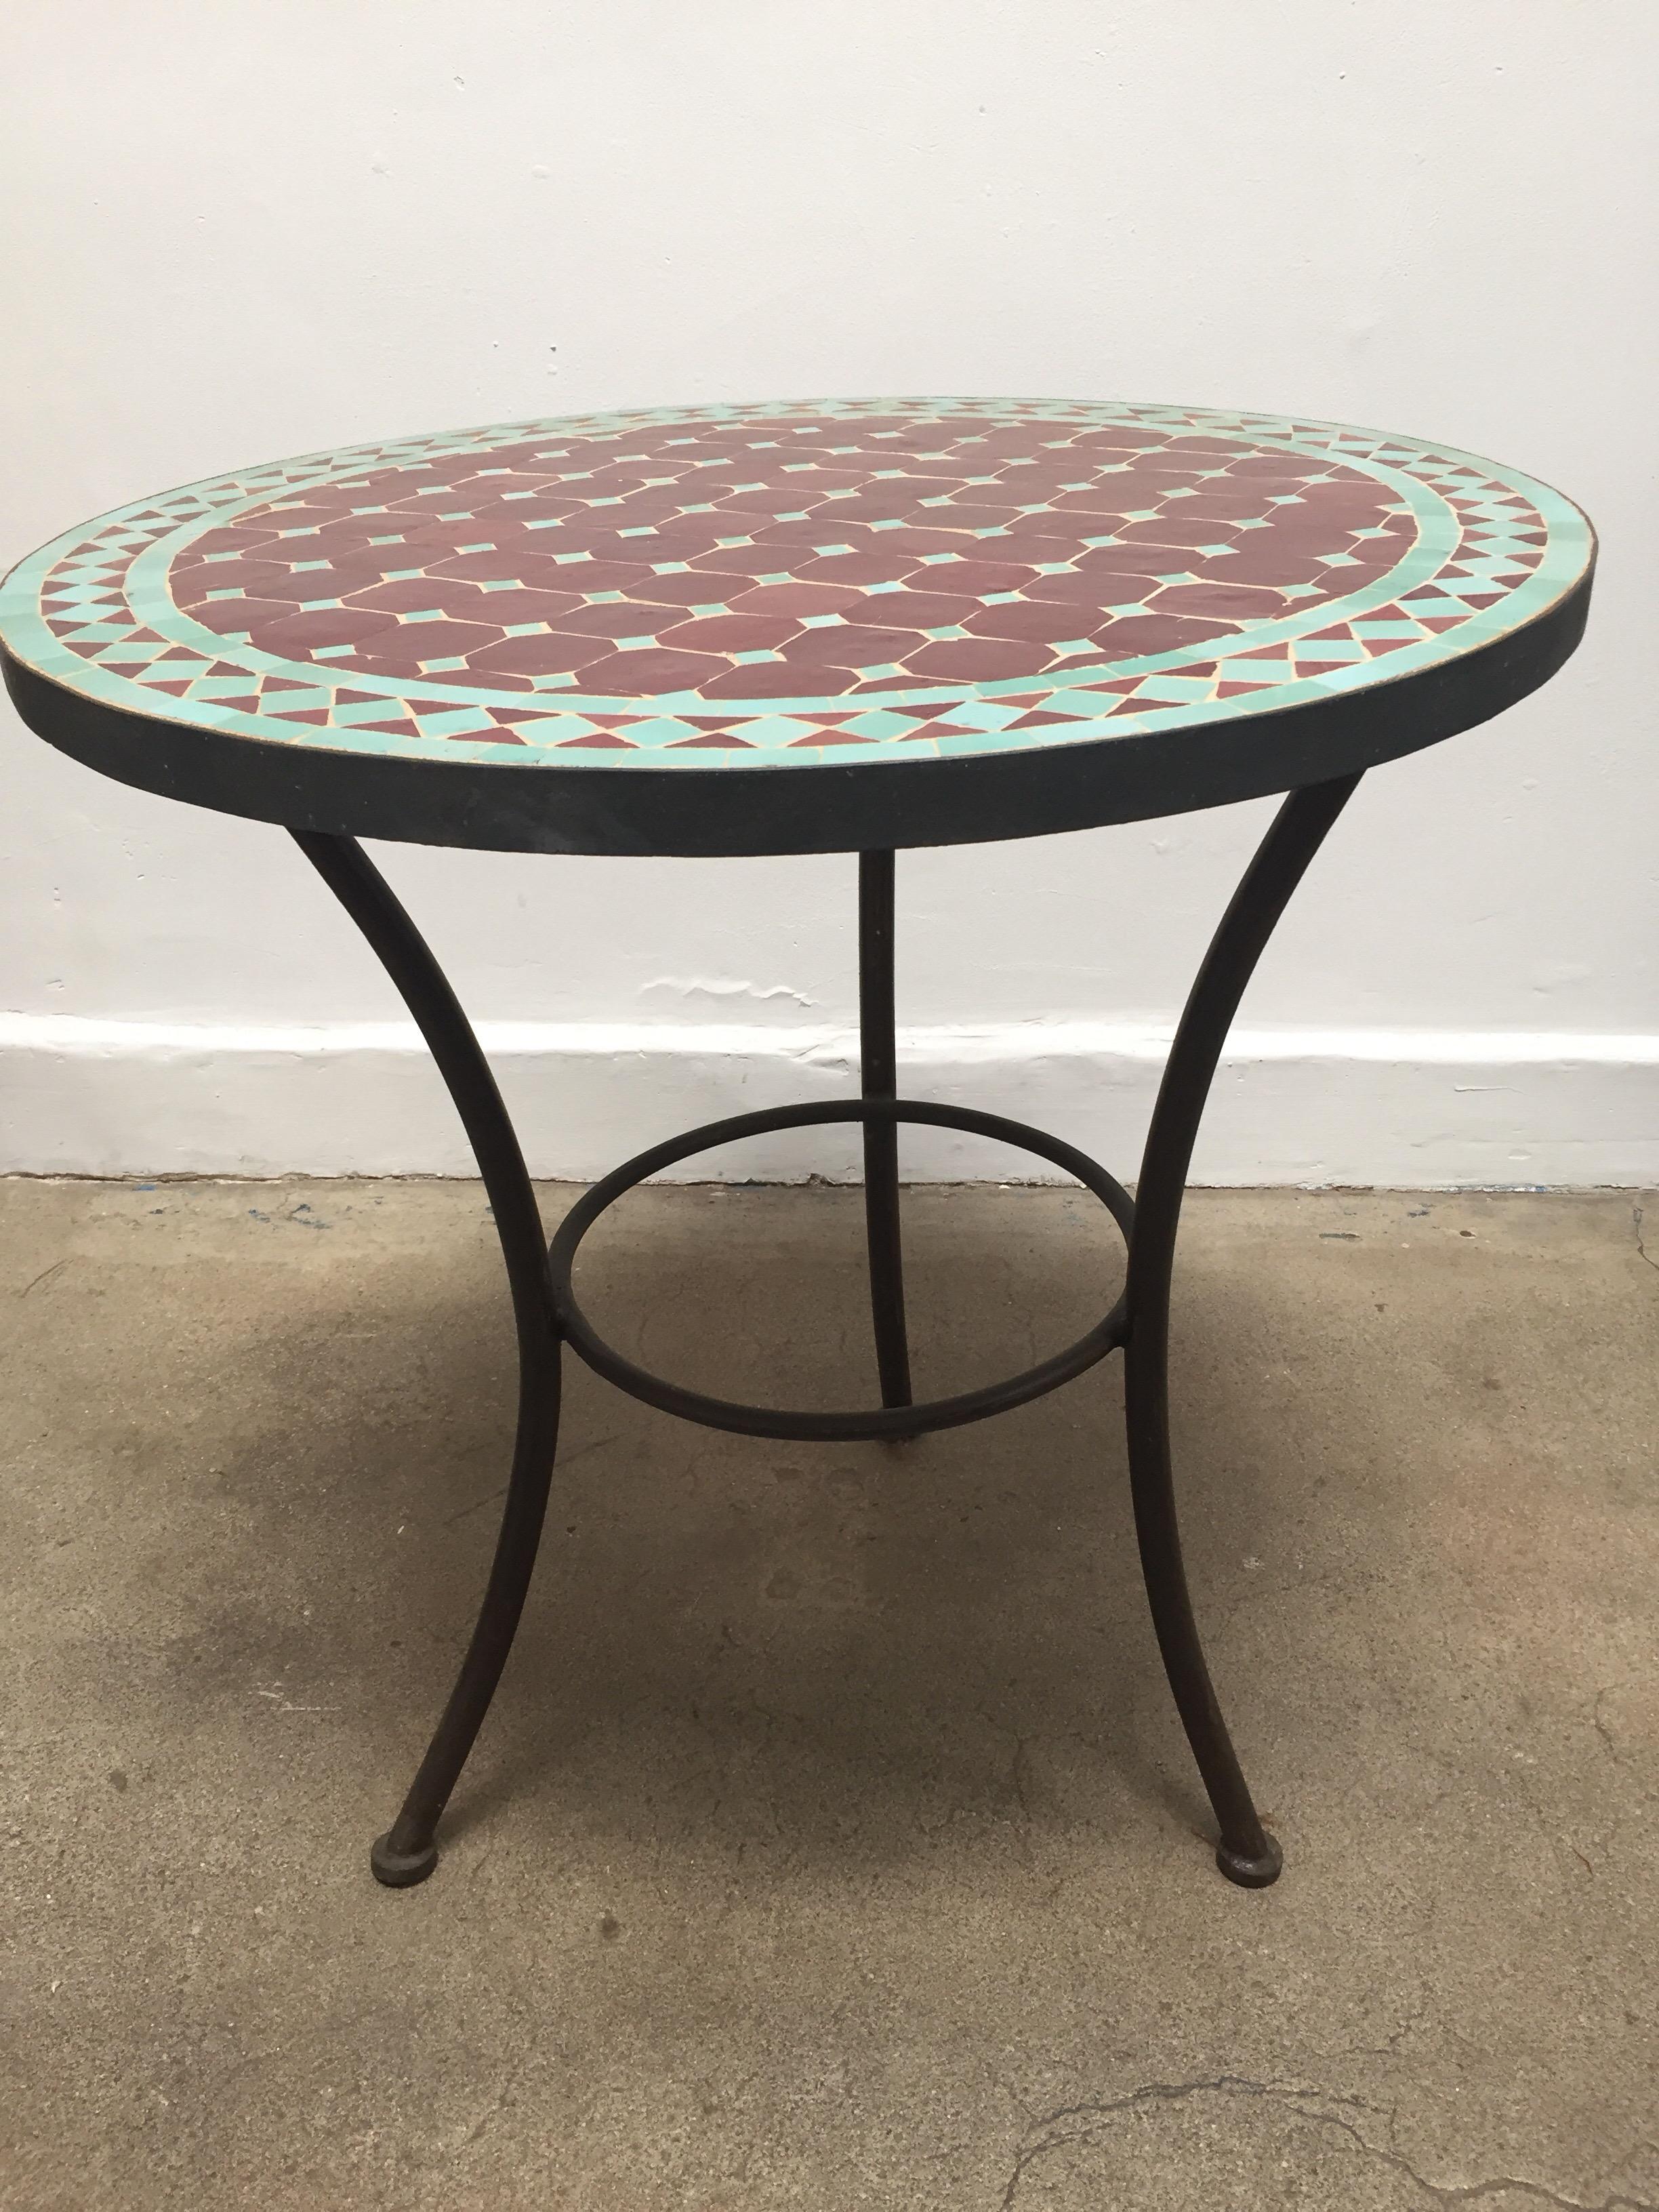 Moroccan round mosaic tile bistro table on iron base.
Green and burgundy tiles hand cut in geometrical designs.
Hand-made by expert artisans in Fez using reclaimed old glazed tiles and making beautiful geometrical designs, colors are aqua green